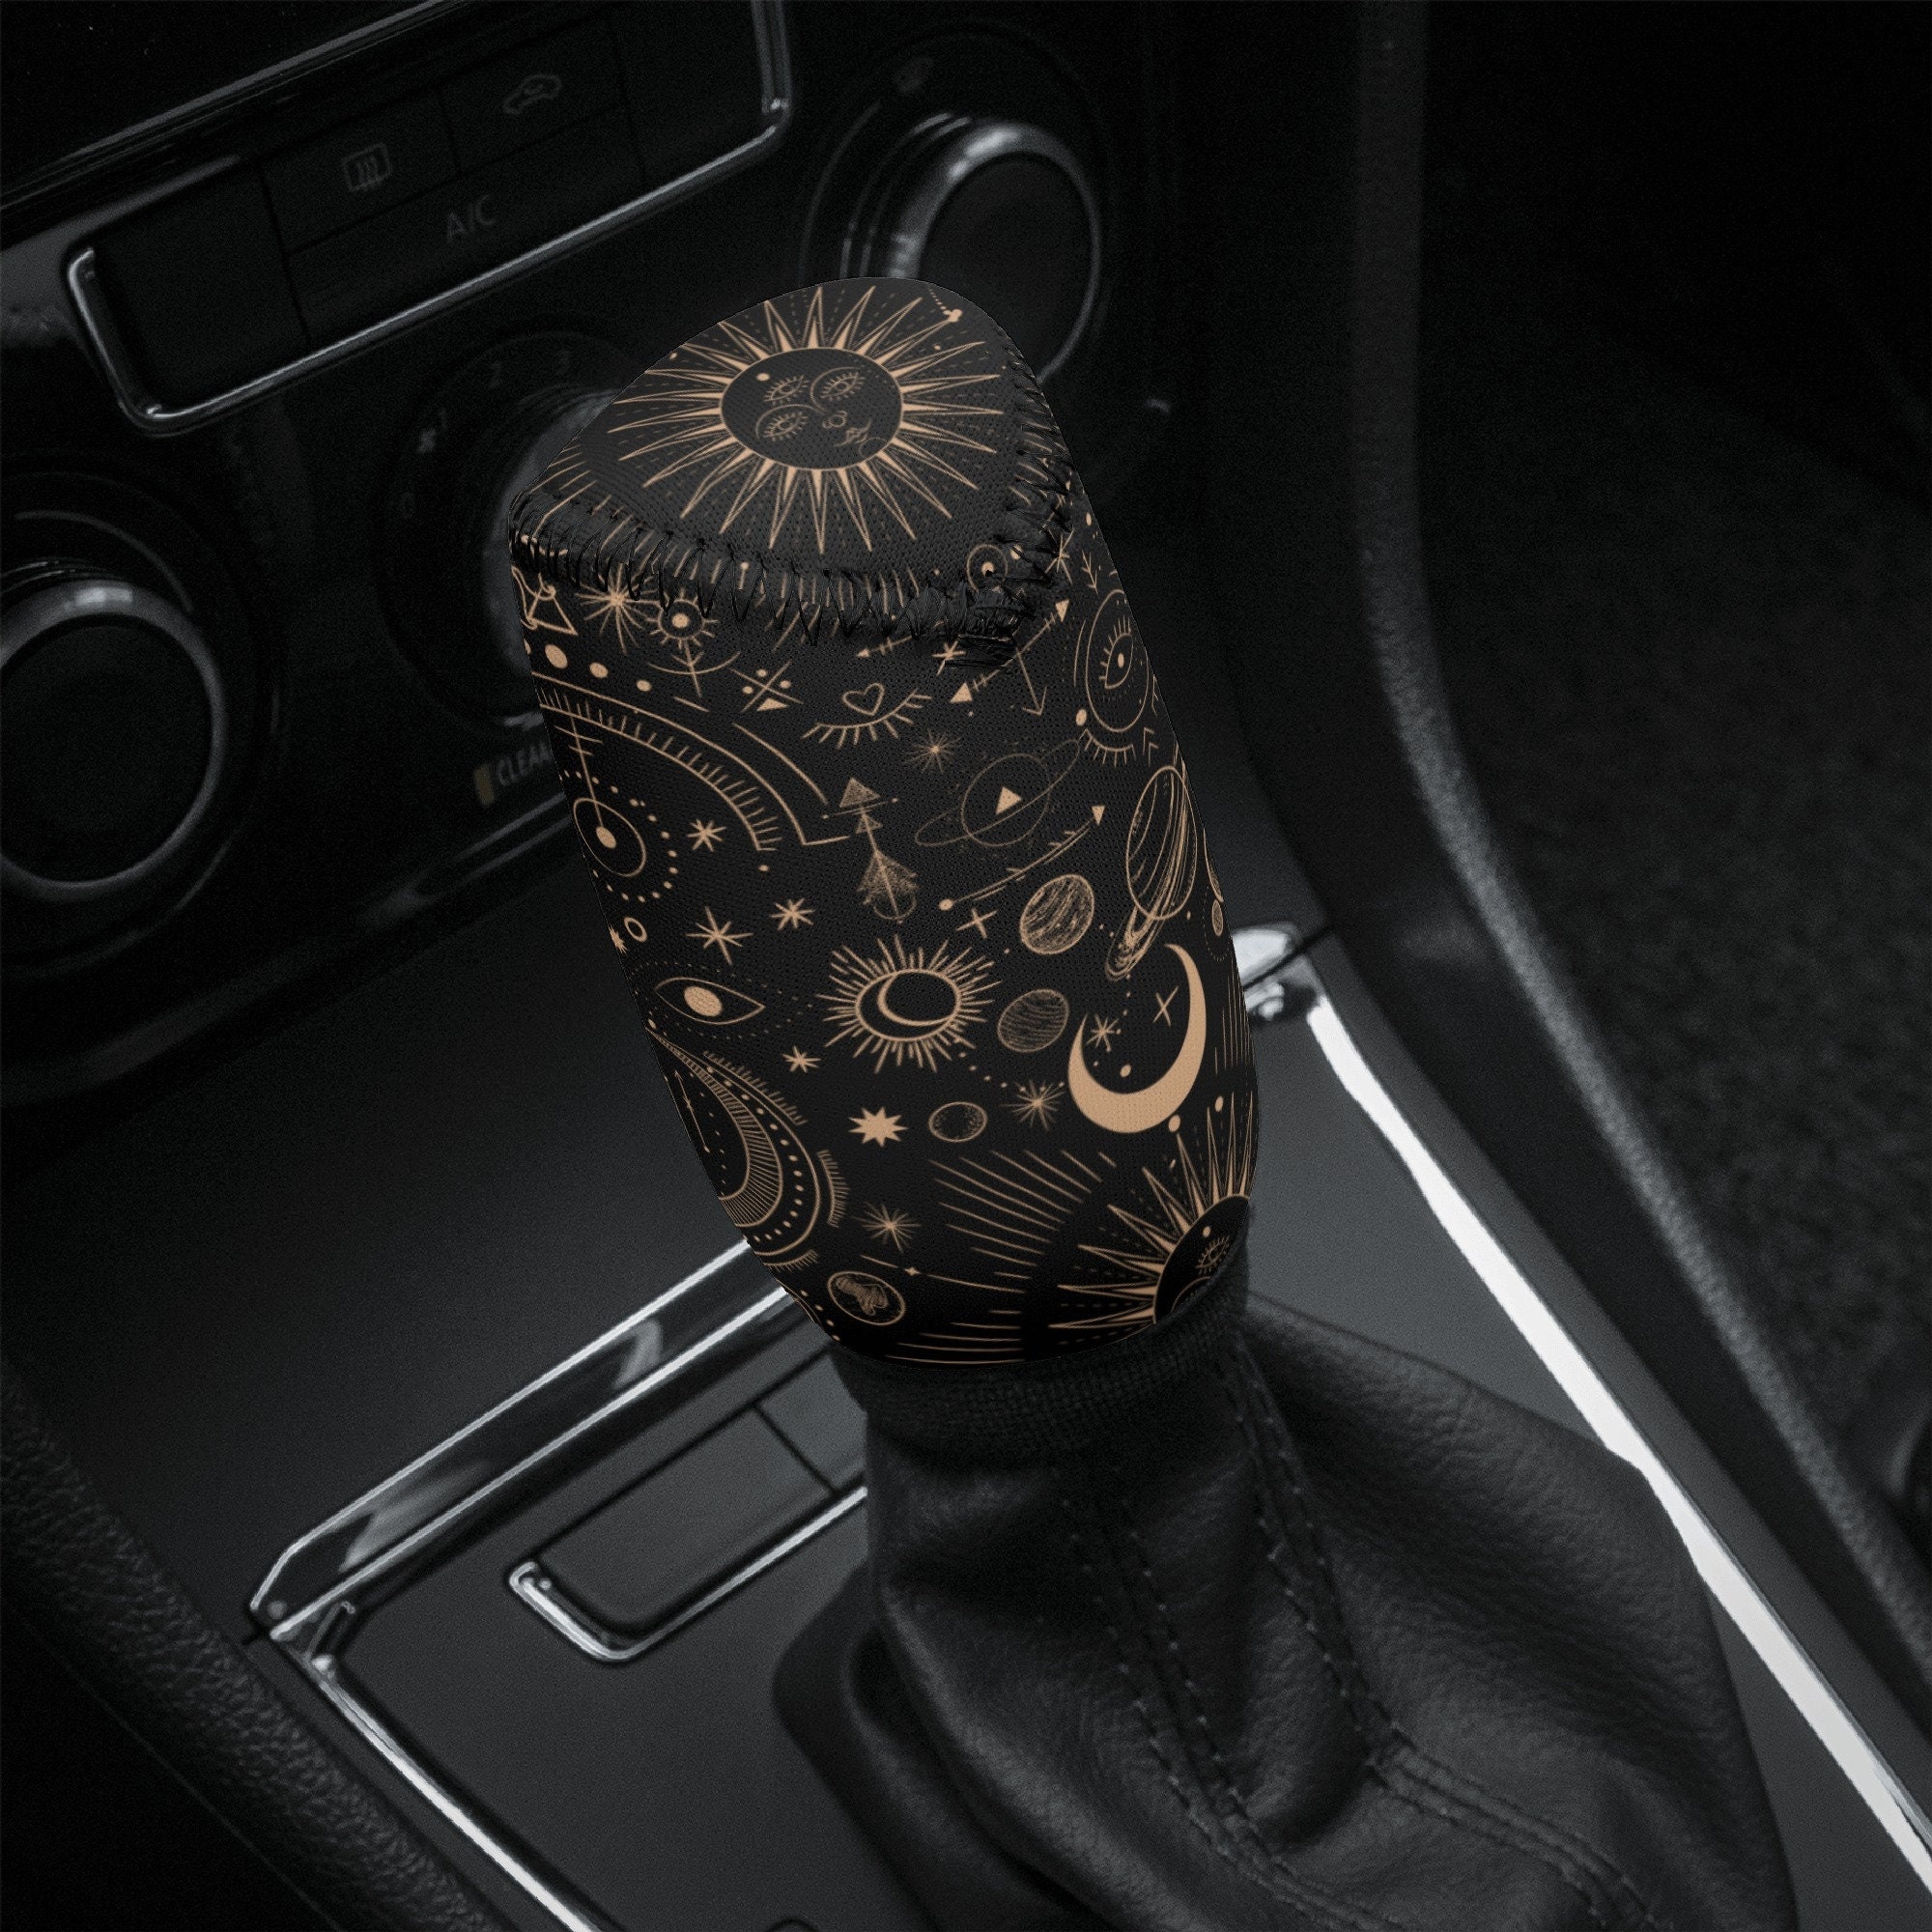  Bling Bling Auto Shift Gear Cover, Luster Crystal Car Knob Gear  Stick Protector Diamond Car Decor Accessories for Women(car Gear Shift Cover)  : Automotive